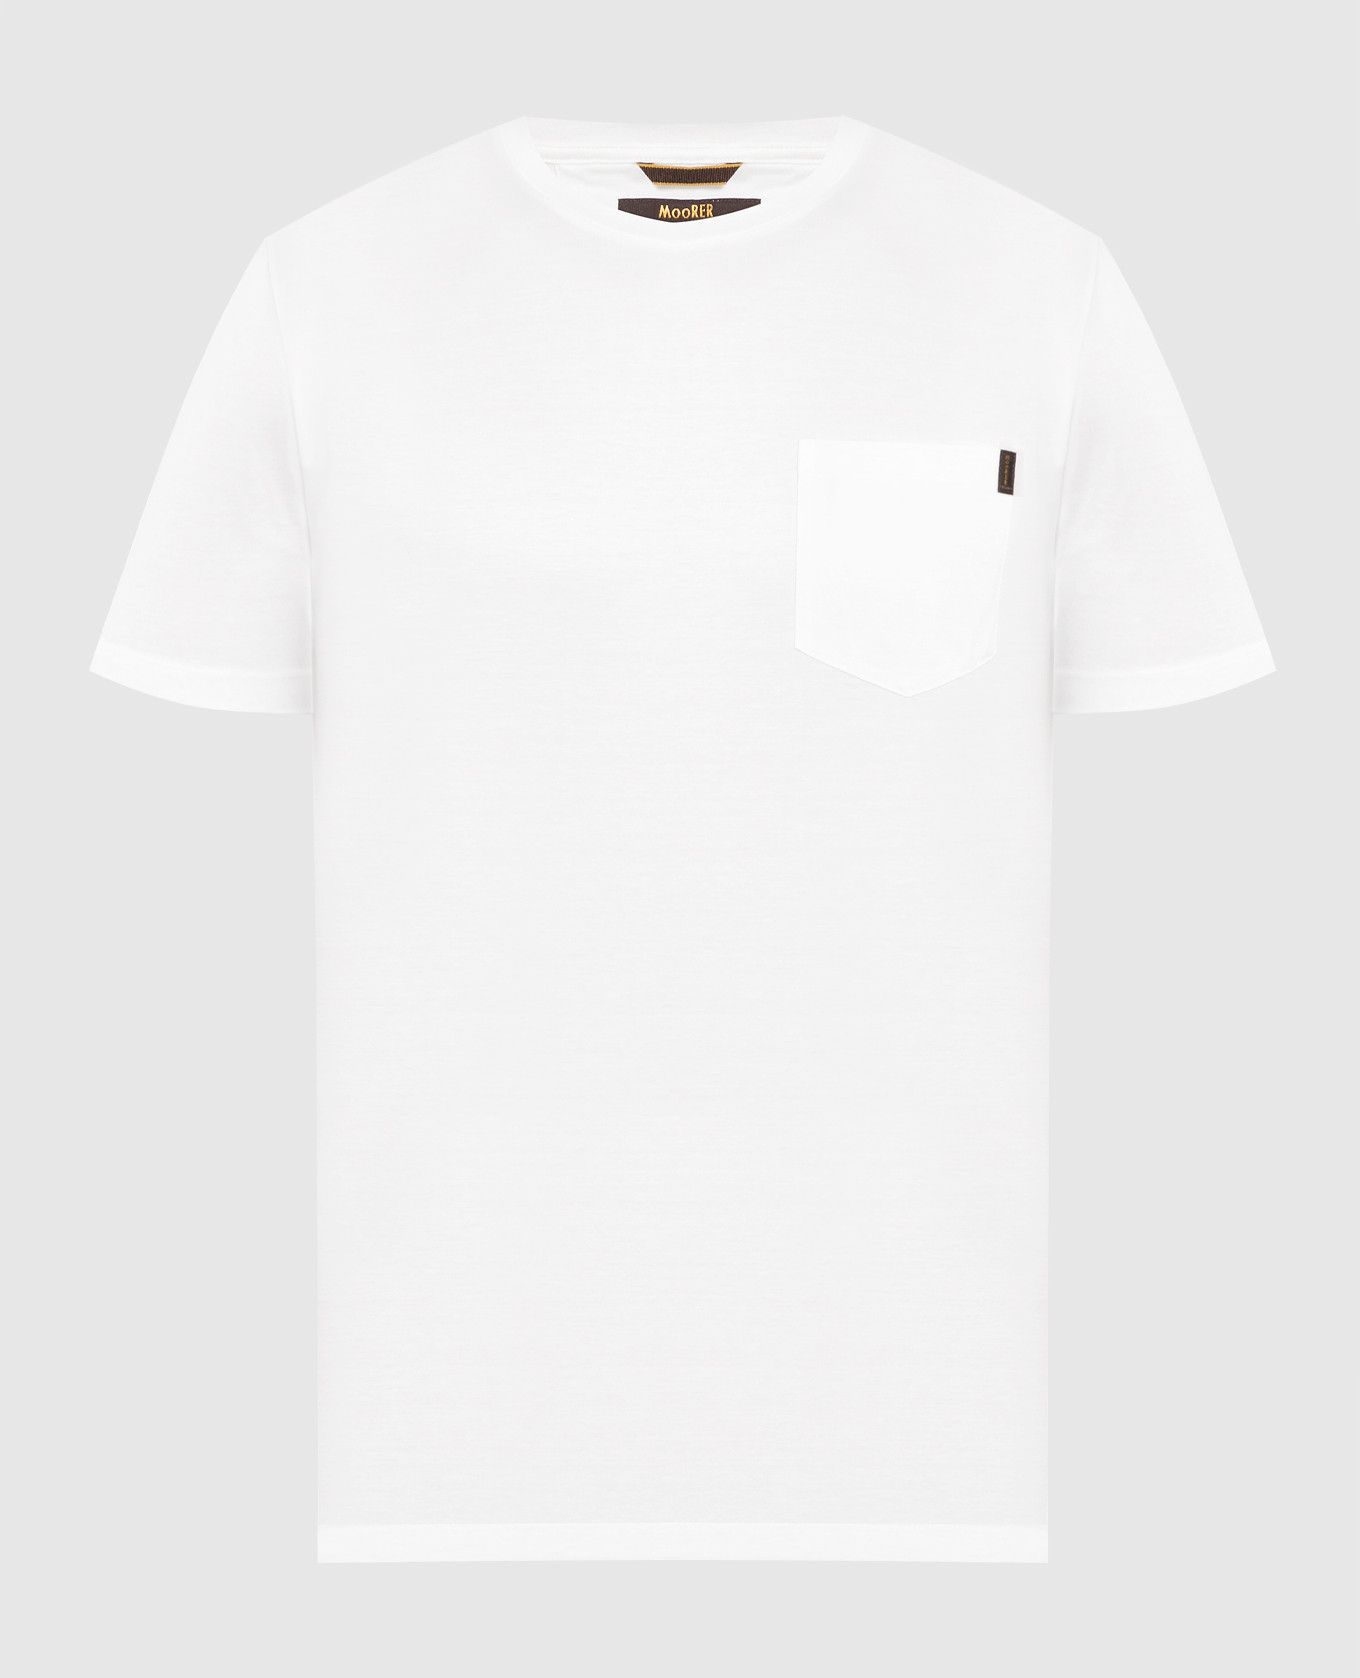 White t-shirt with Bruzio-Jcl